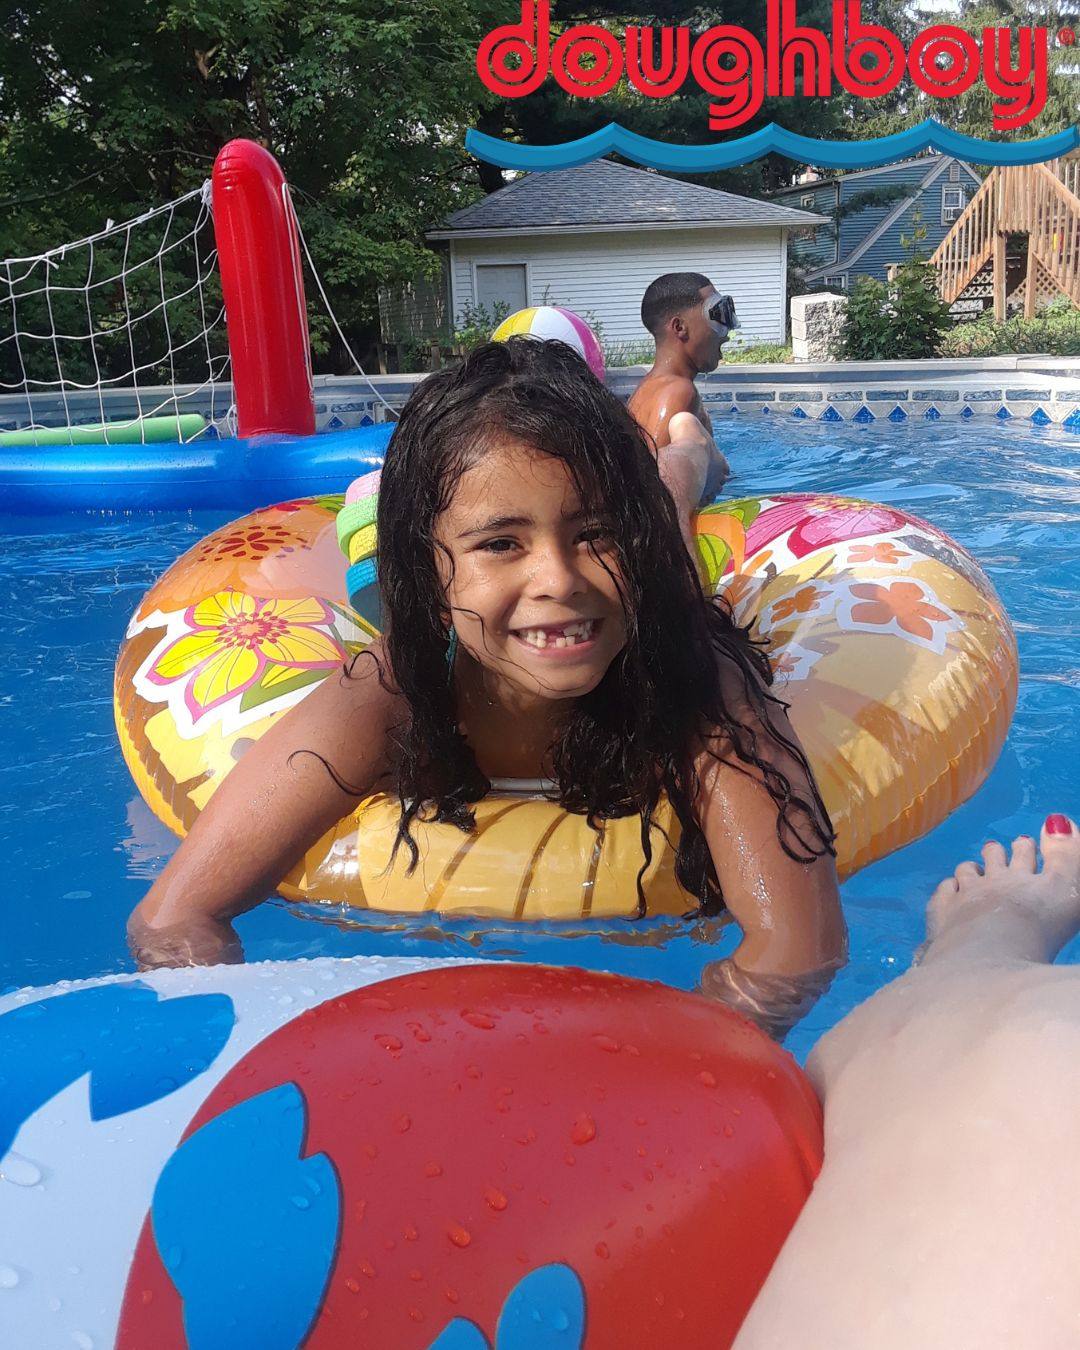 A girl is laying on a pool float in an above ground swimming pool.